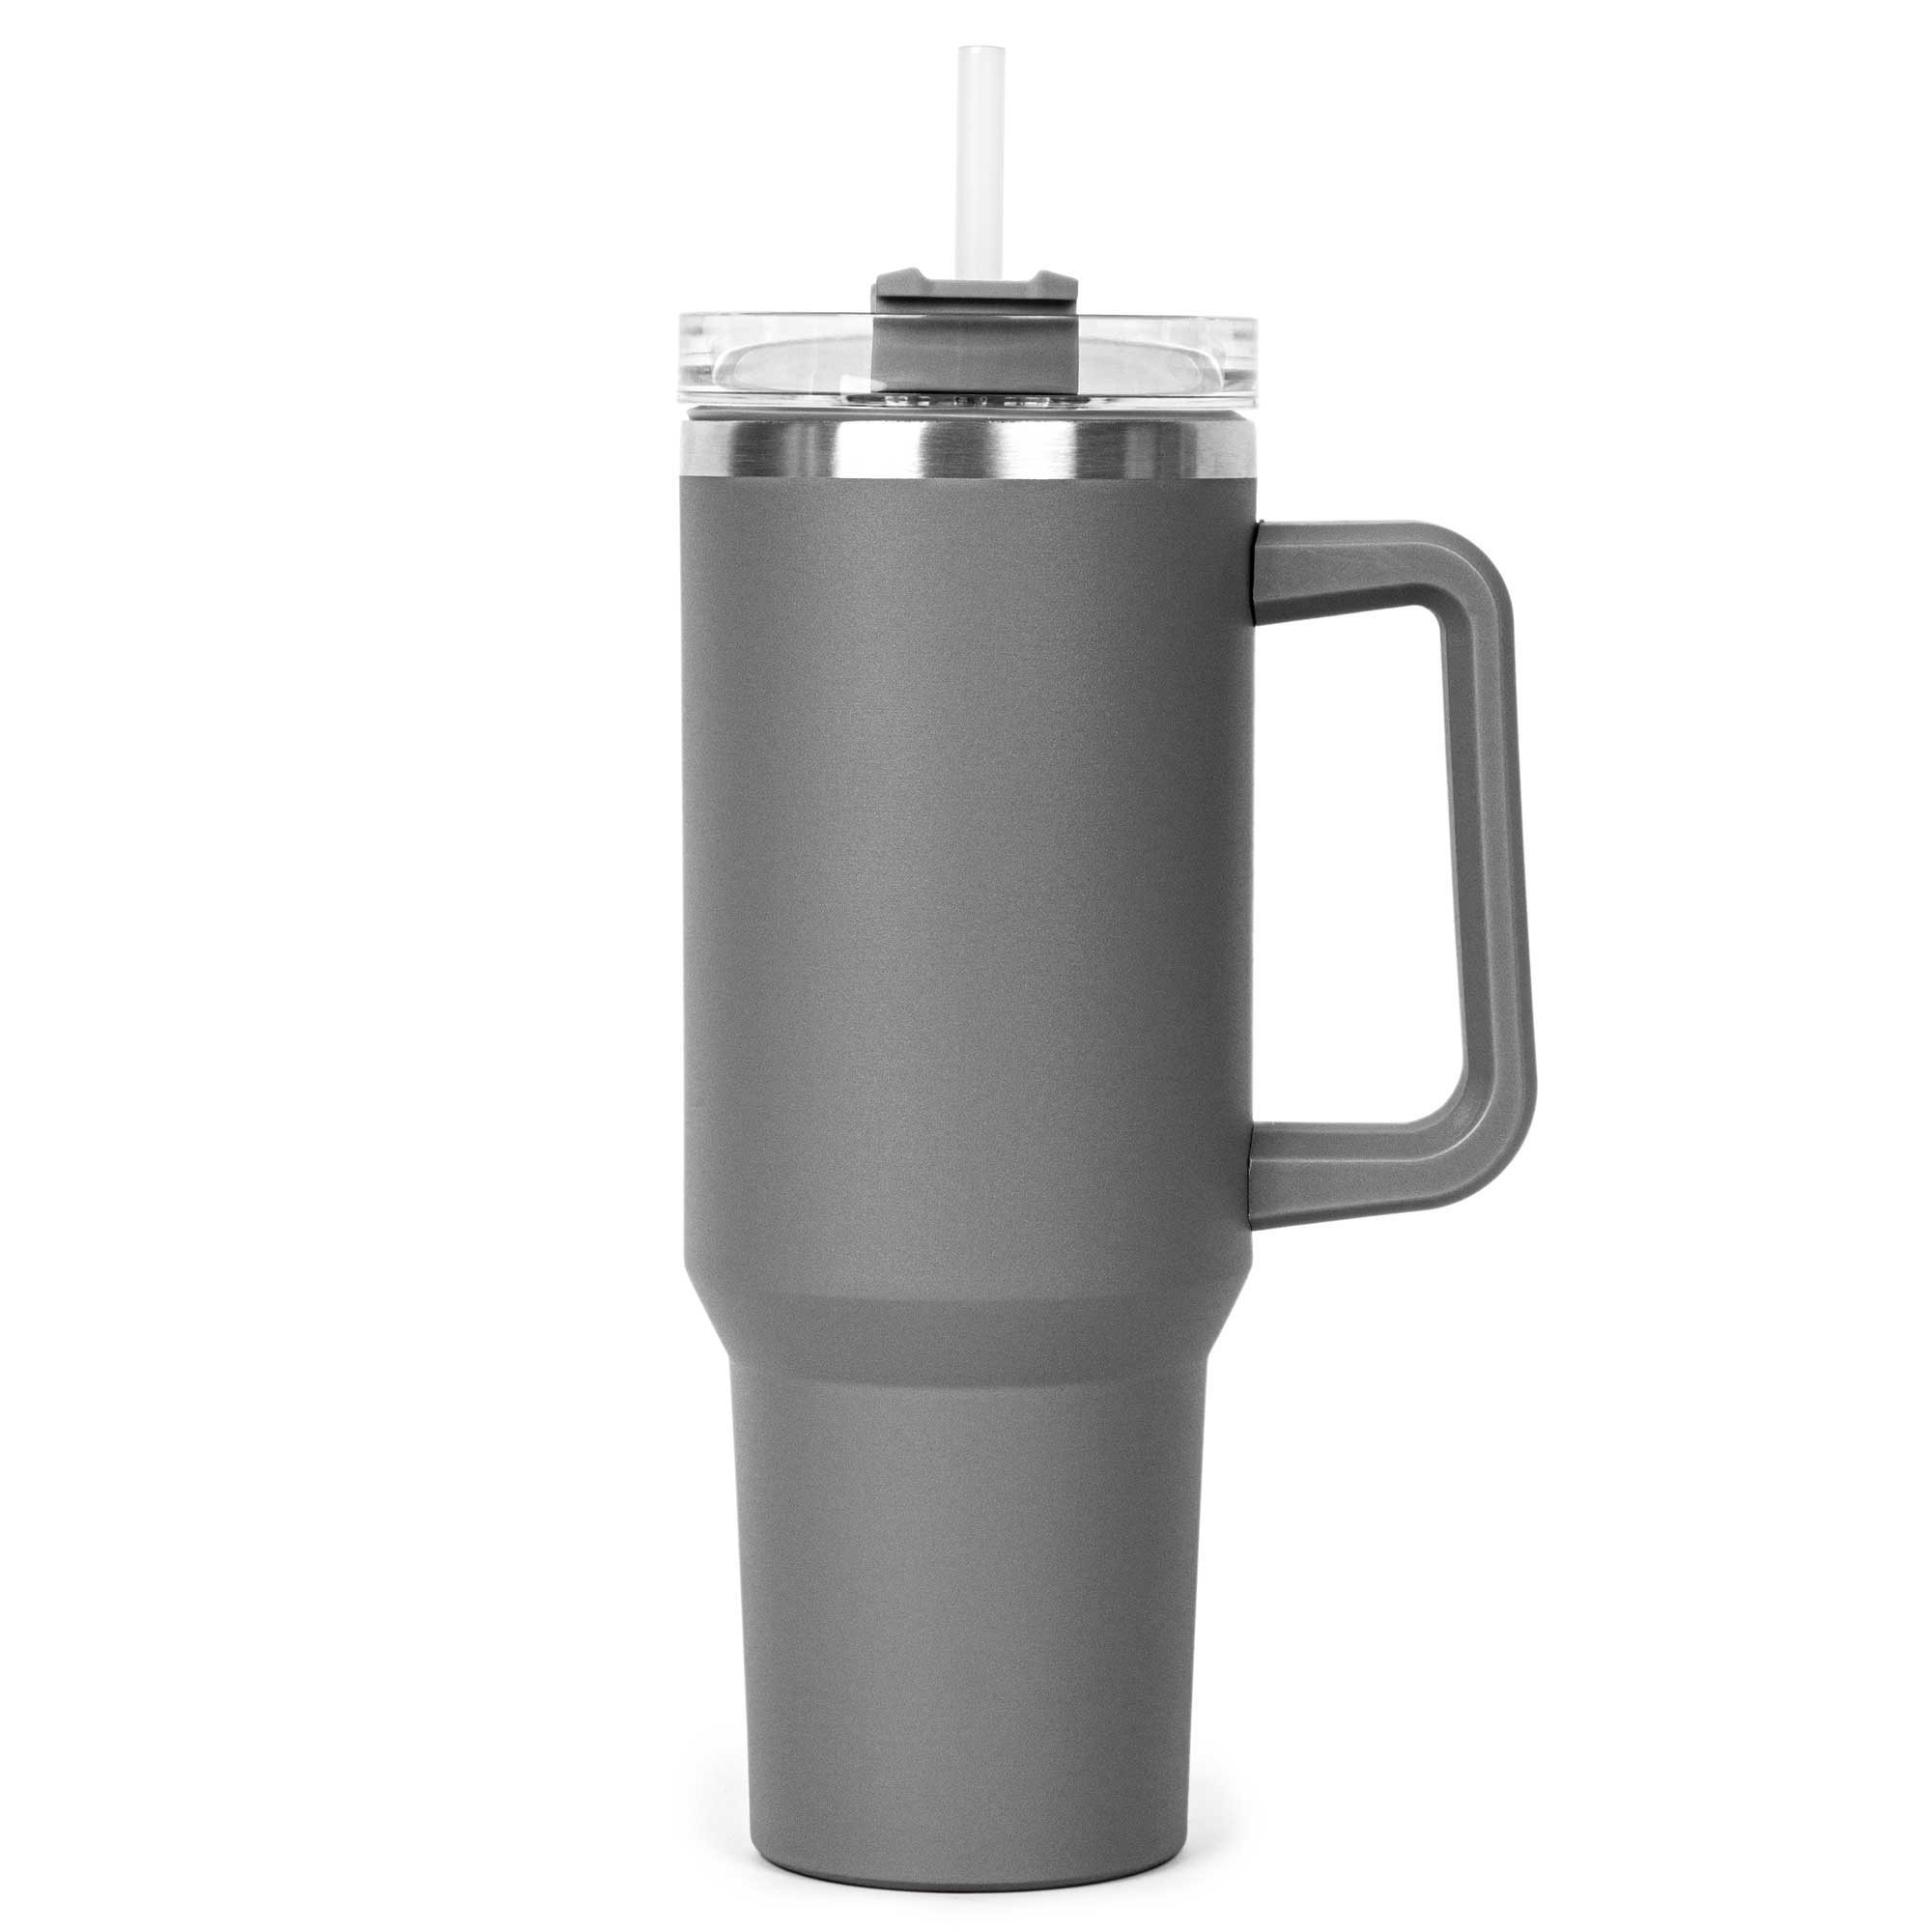 How long does coffee last in a travel mug?